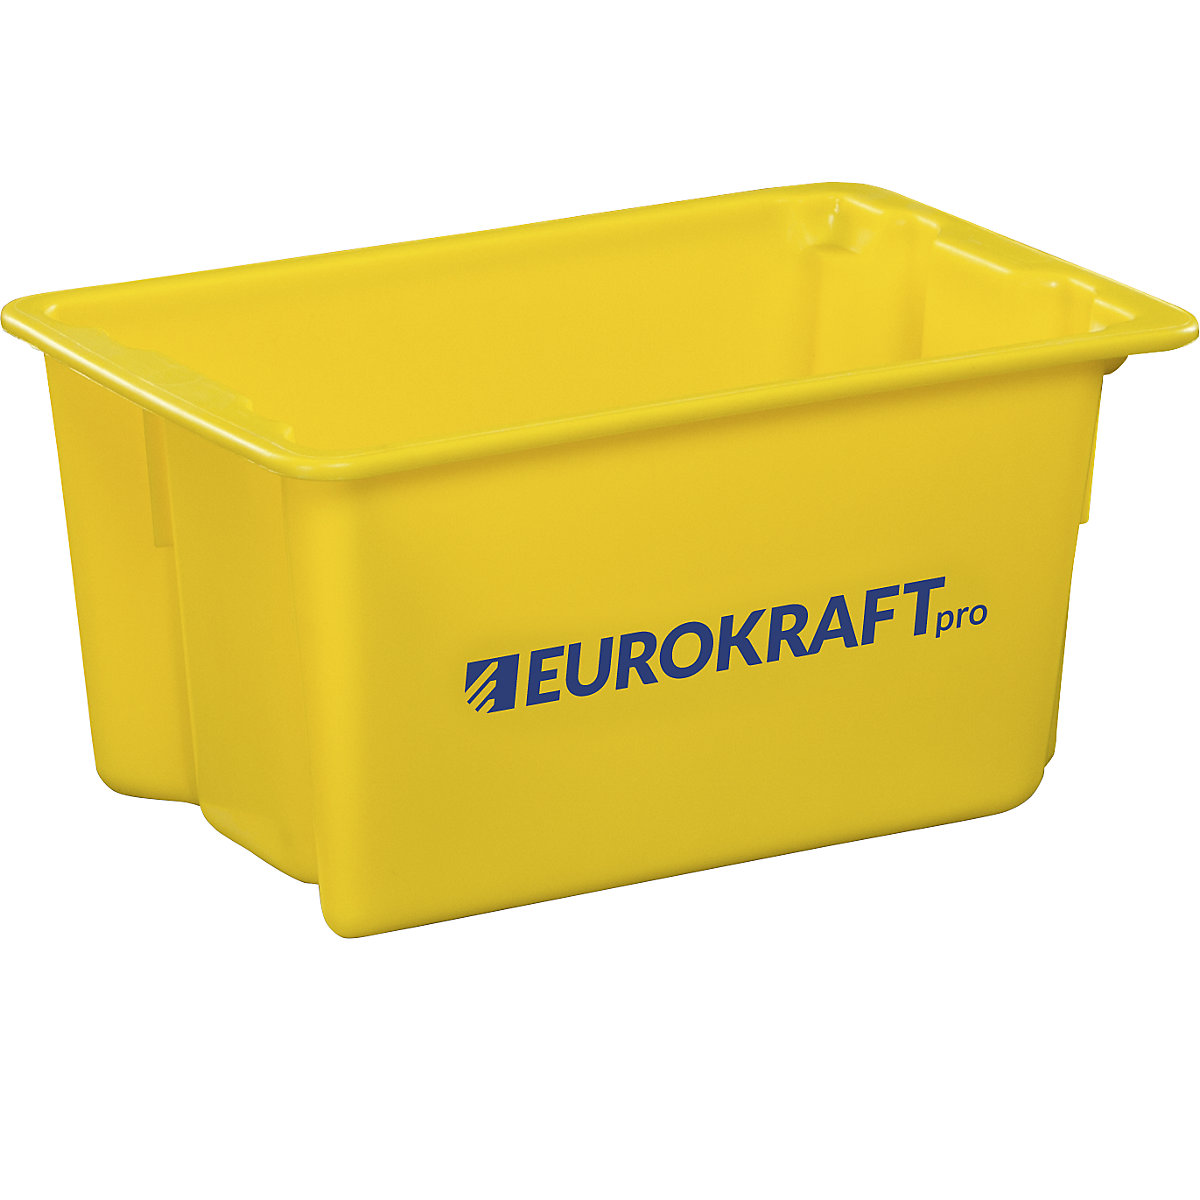 EUROKRAFTpro – Stack/nest container made of polypropylene suitable for foodstuffs, 50 l capacity, pack of 3, solid walls and base, yellow